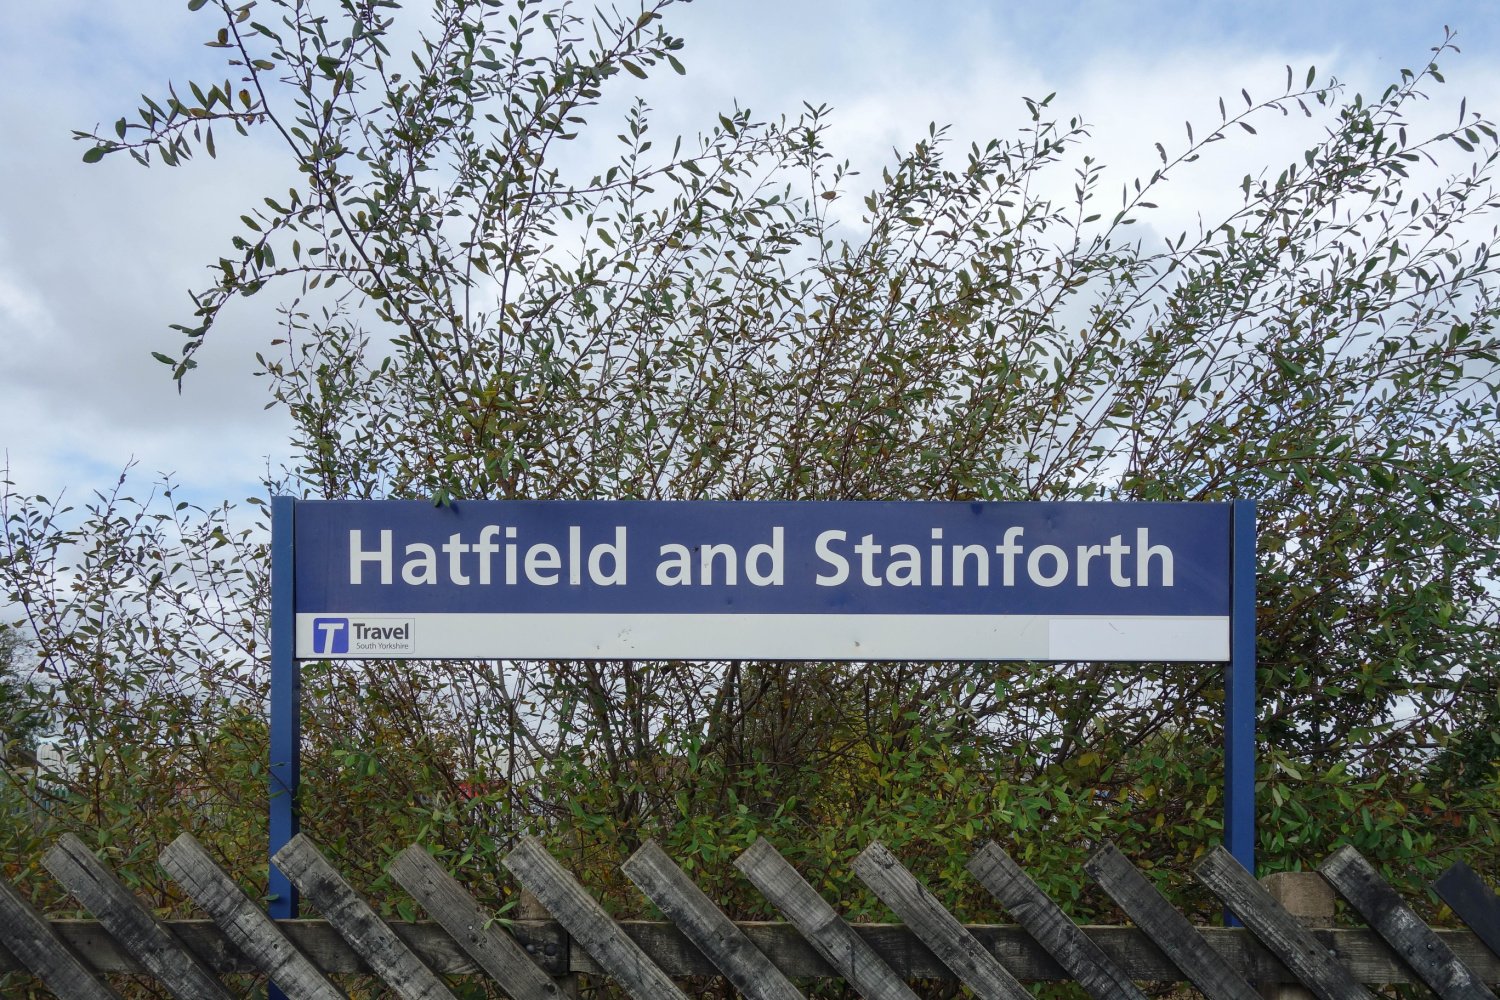 Image name hatfield and stainforth train station south yorkshire the 6 image from the post Hatfield, South Yorkshire in Yorkshire.com.